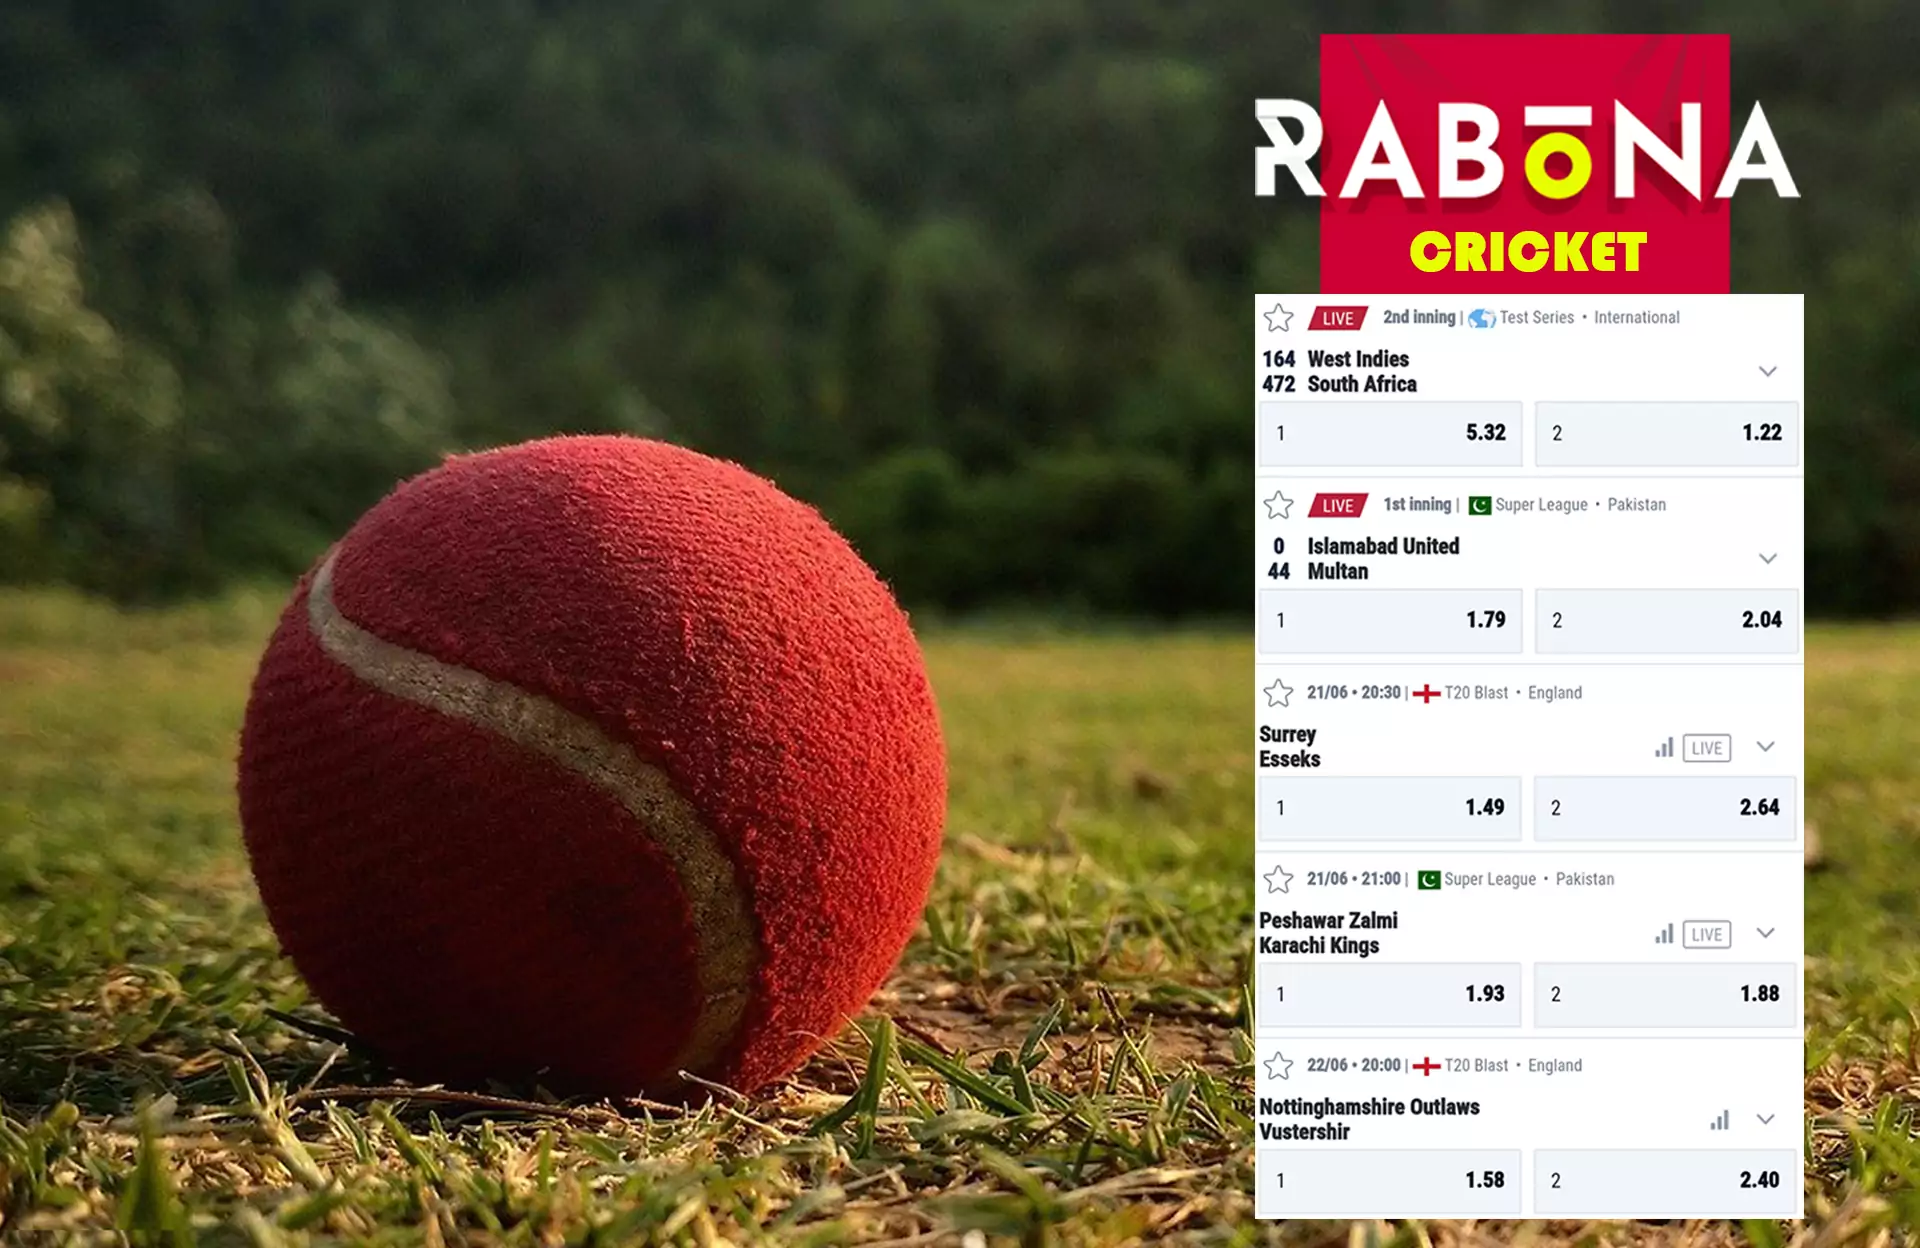 Cricket fans can place bets on their favorite teams.